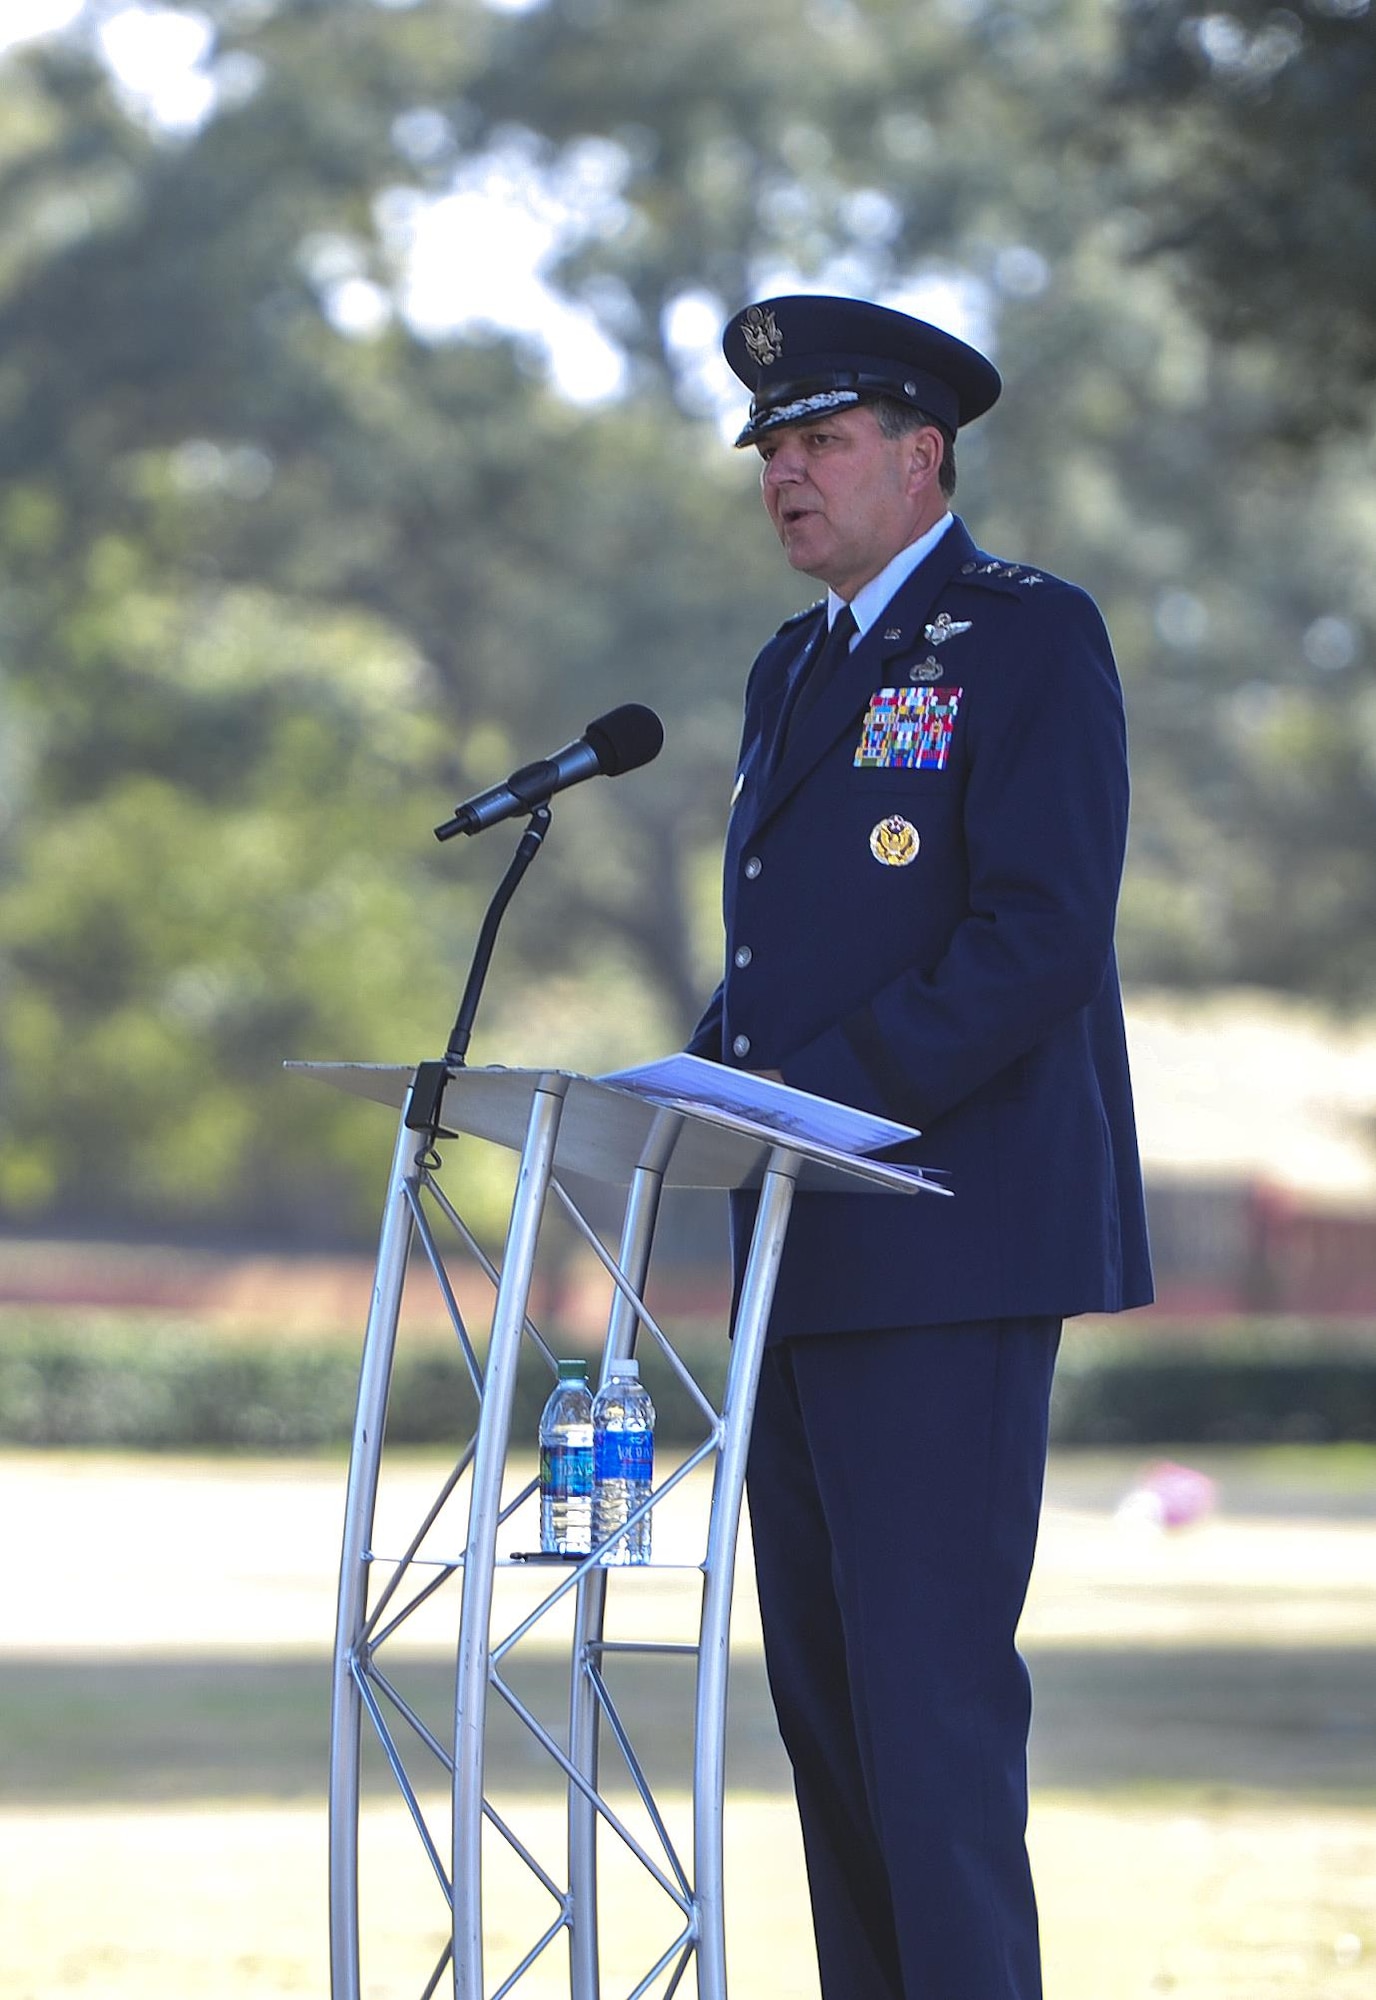 Lt. Gen. Brad Heithold, Air Force Special Operations Command commander, speaks about the mission of Spirit 03 during a remembrance ceremony at Barrancas National Cemetery on Naval Air Station Pensacola, Fla., Jan. 31, 2015. Losing Spirit 03 and its crew members was the largest single loss by any Air Force unit during Operation Desert Storm. (U.S. Air Force photo/Airman 1st Class Jeff Parkinson)